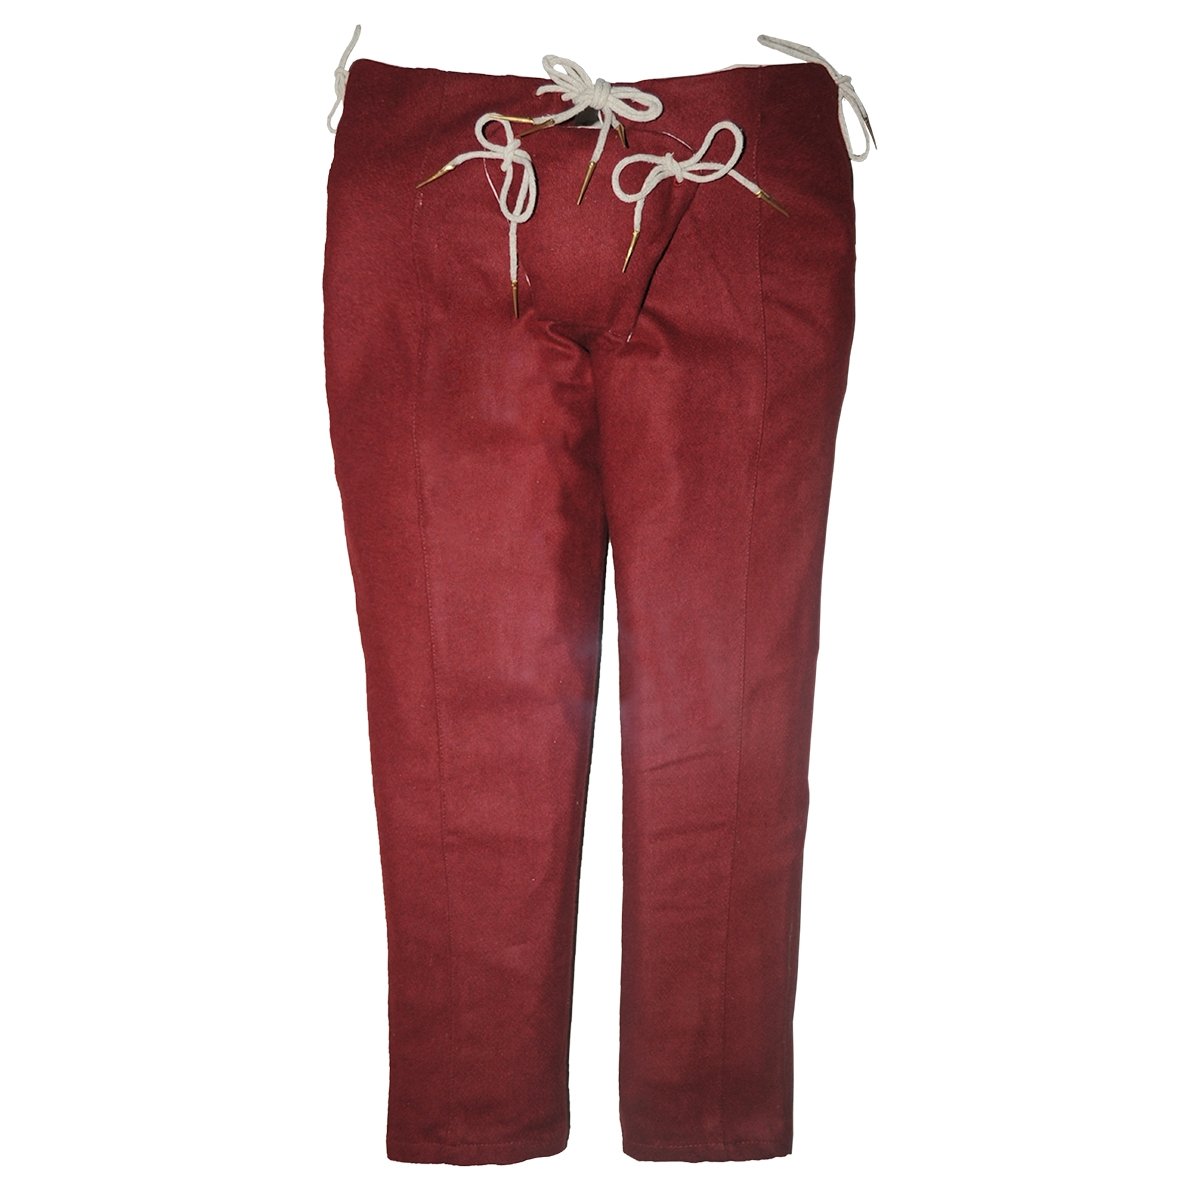 Man's 15th C. Trousers - Maroon, Size M